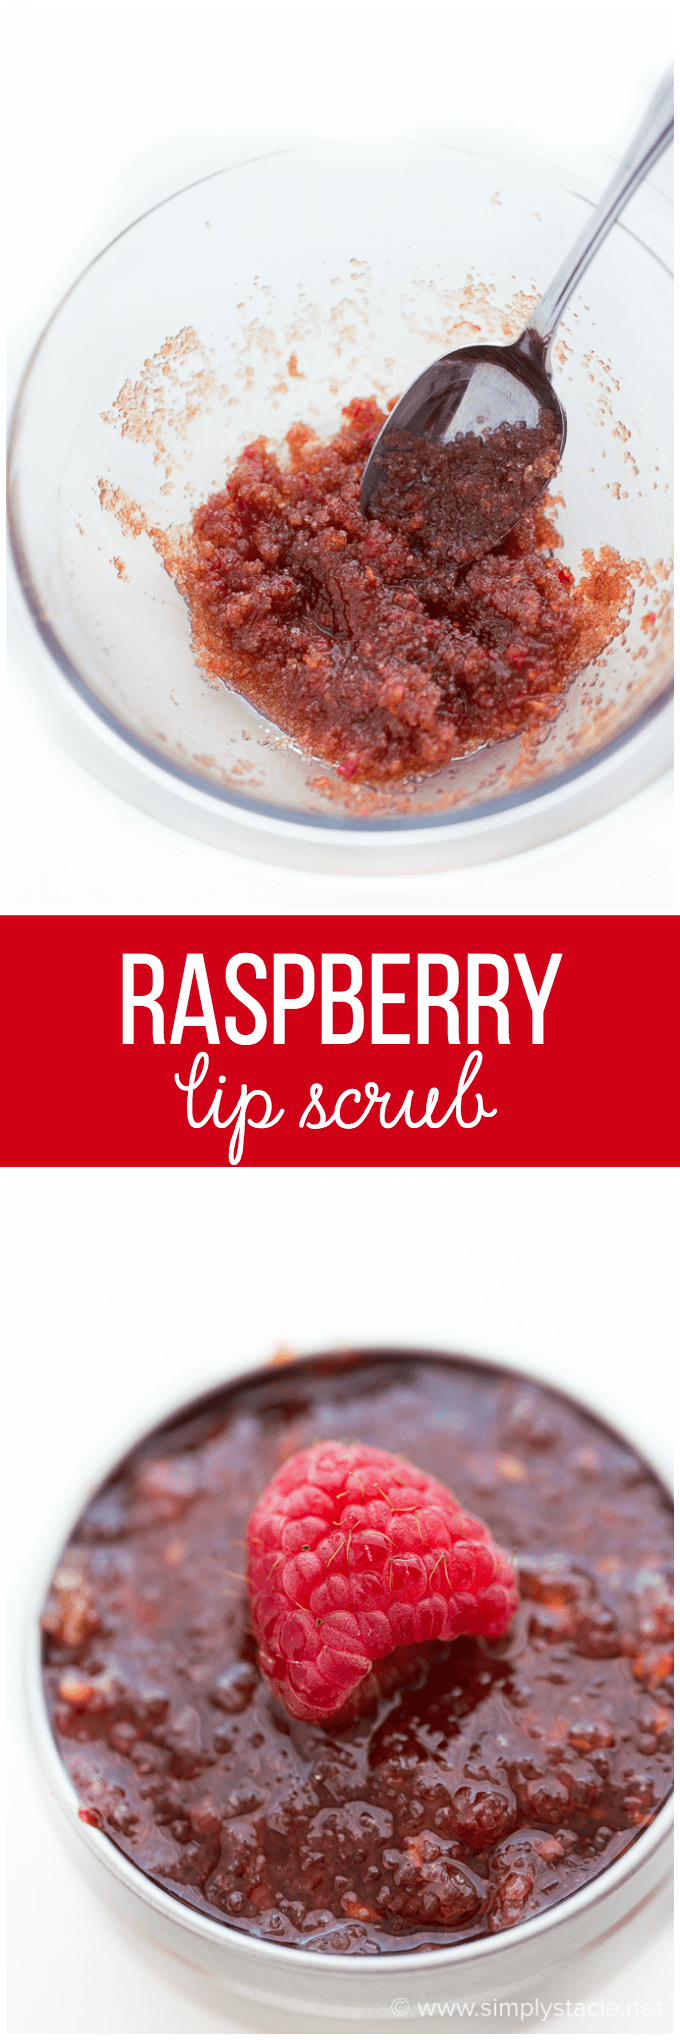 Raspberry Lip ScrubRaspberry Lip Scrub - Get soft, kissable lips with this simple DIY beauty recipe. It's made with three natural ingredients that you may already have in your home!